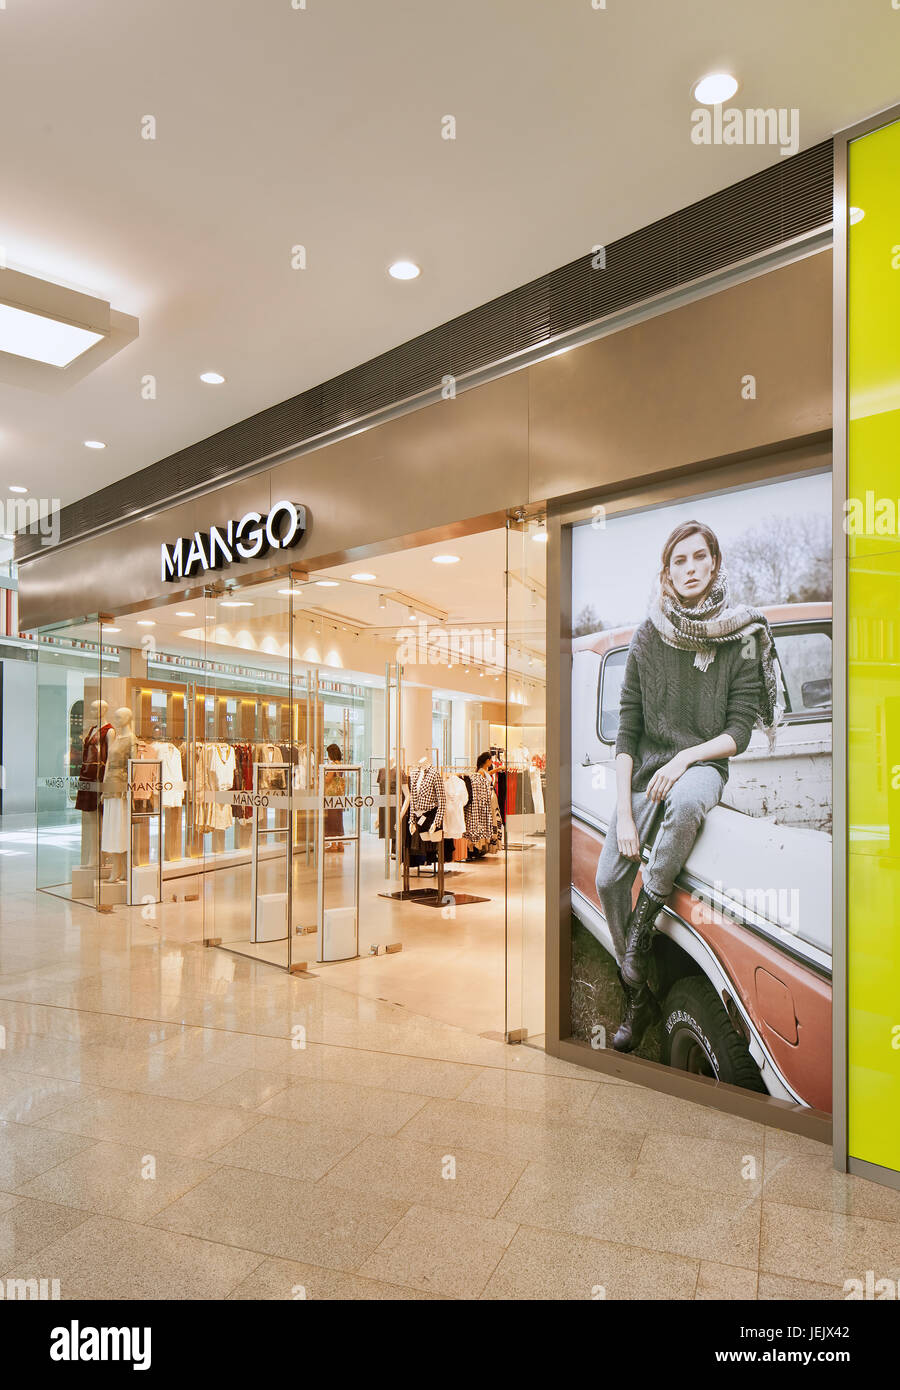 Mango Clothing Retail Shop High Resolution Stock Photography and Images -  Alamy